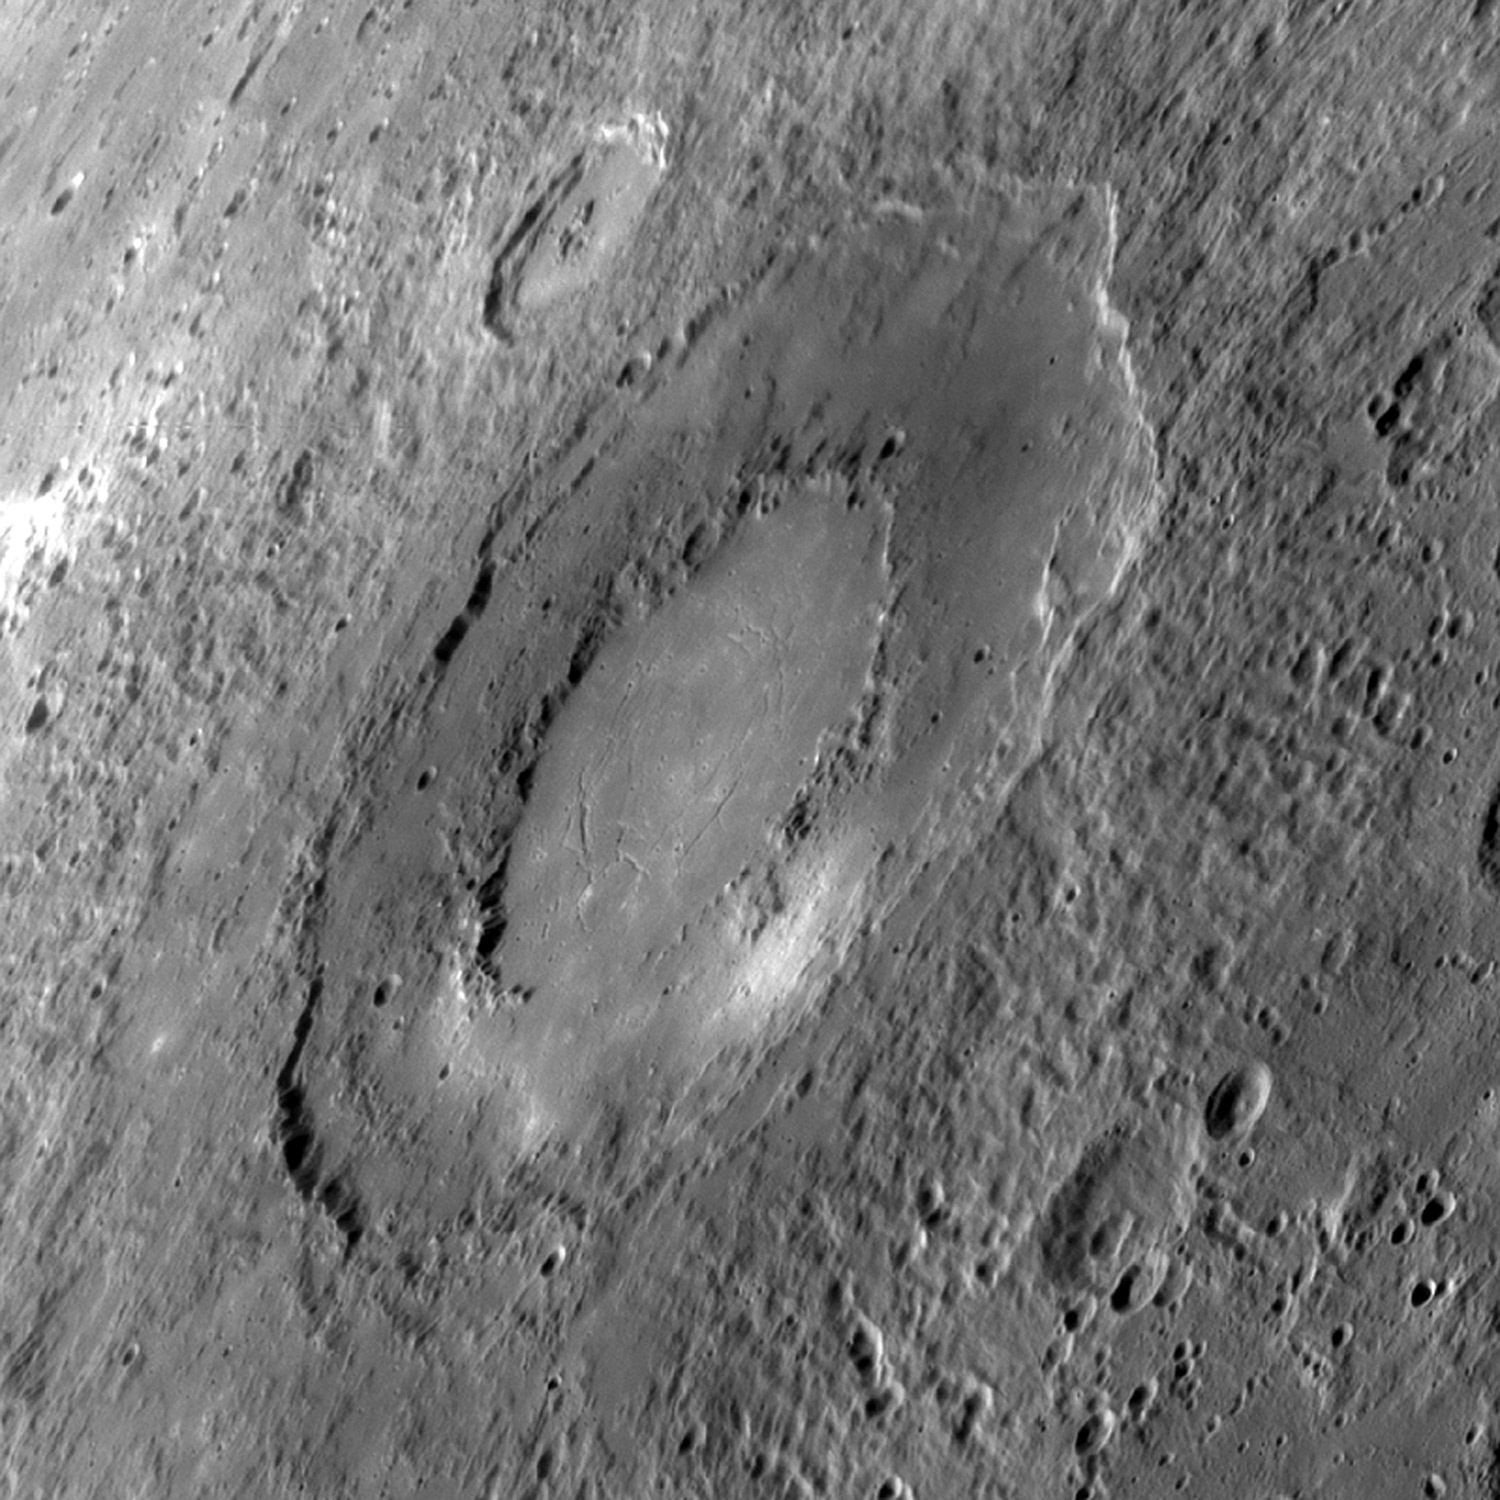 During a pre-orbital flyby in 2009, Messenger took this image of an as-yet unnamed impact basin. The outer diameter of the formation measures approximately 160 mi. (260 km).  One of the perks that comes with discovering or mapping a feature for the first time is the privilege of choosing its name. So far, no announcement about what the basin will be called.